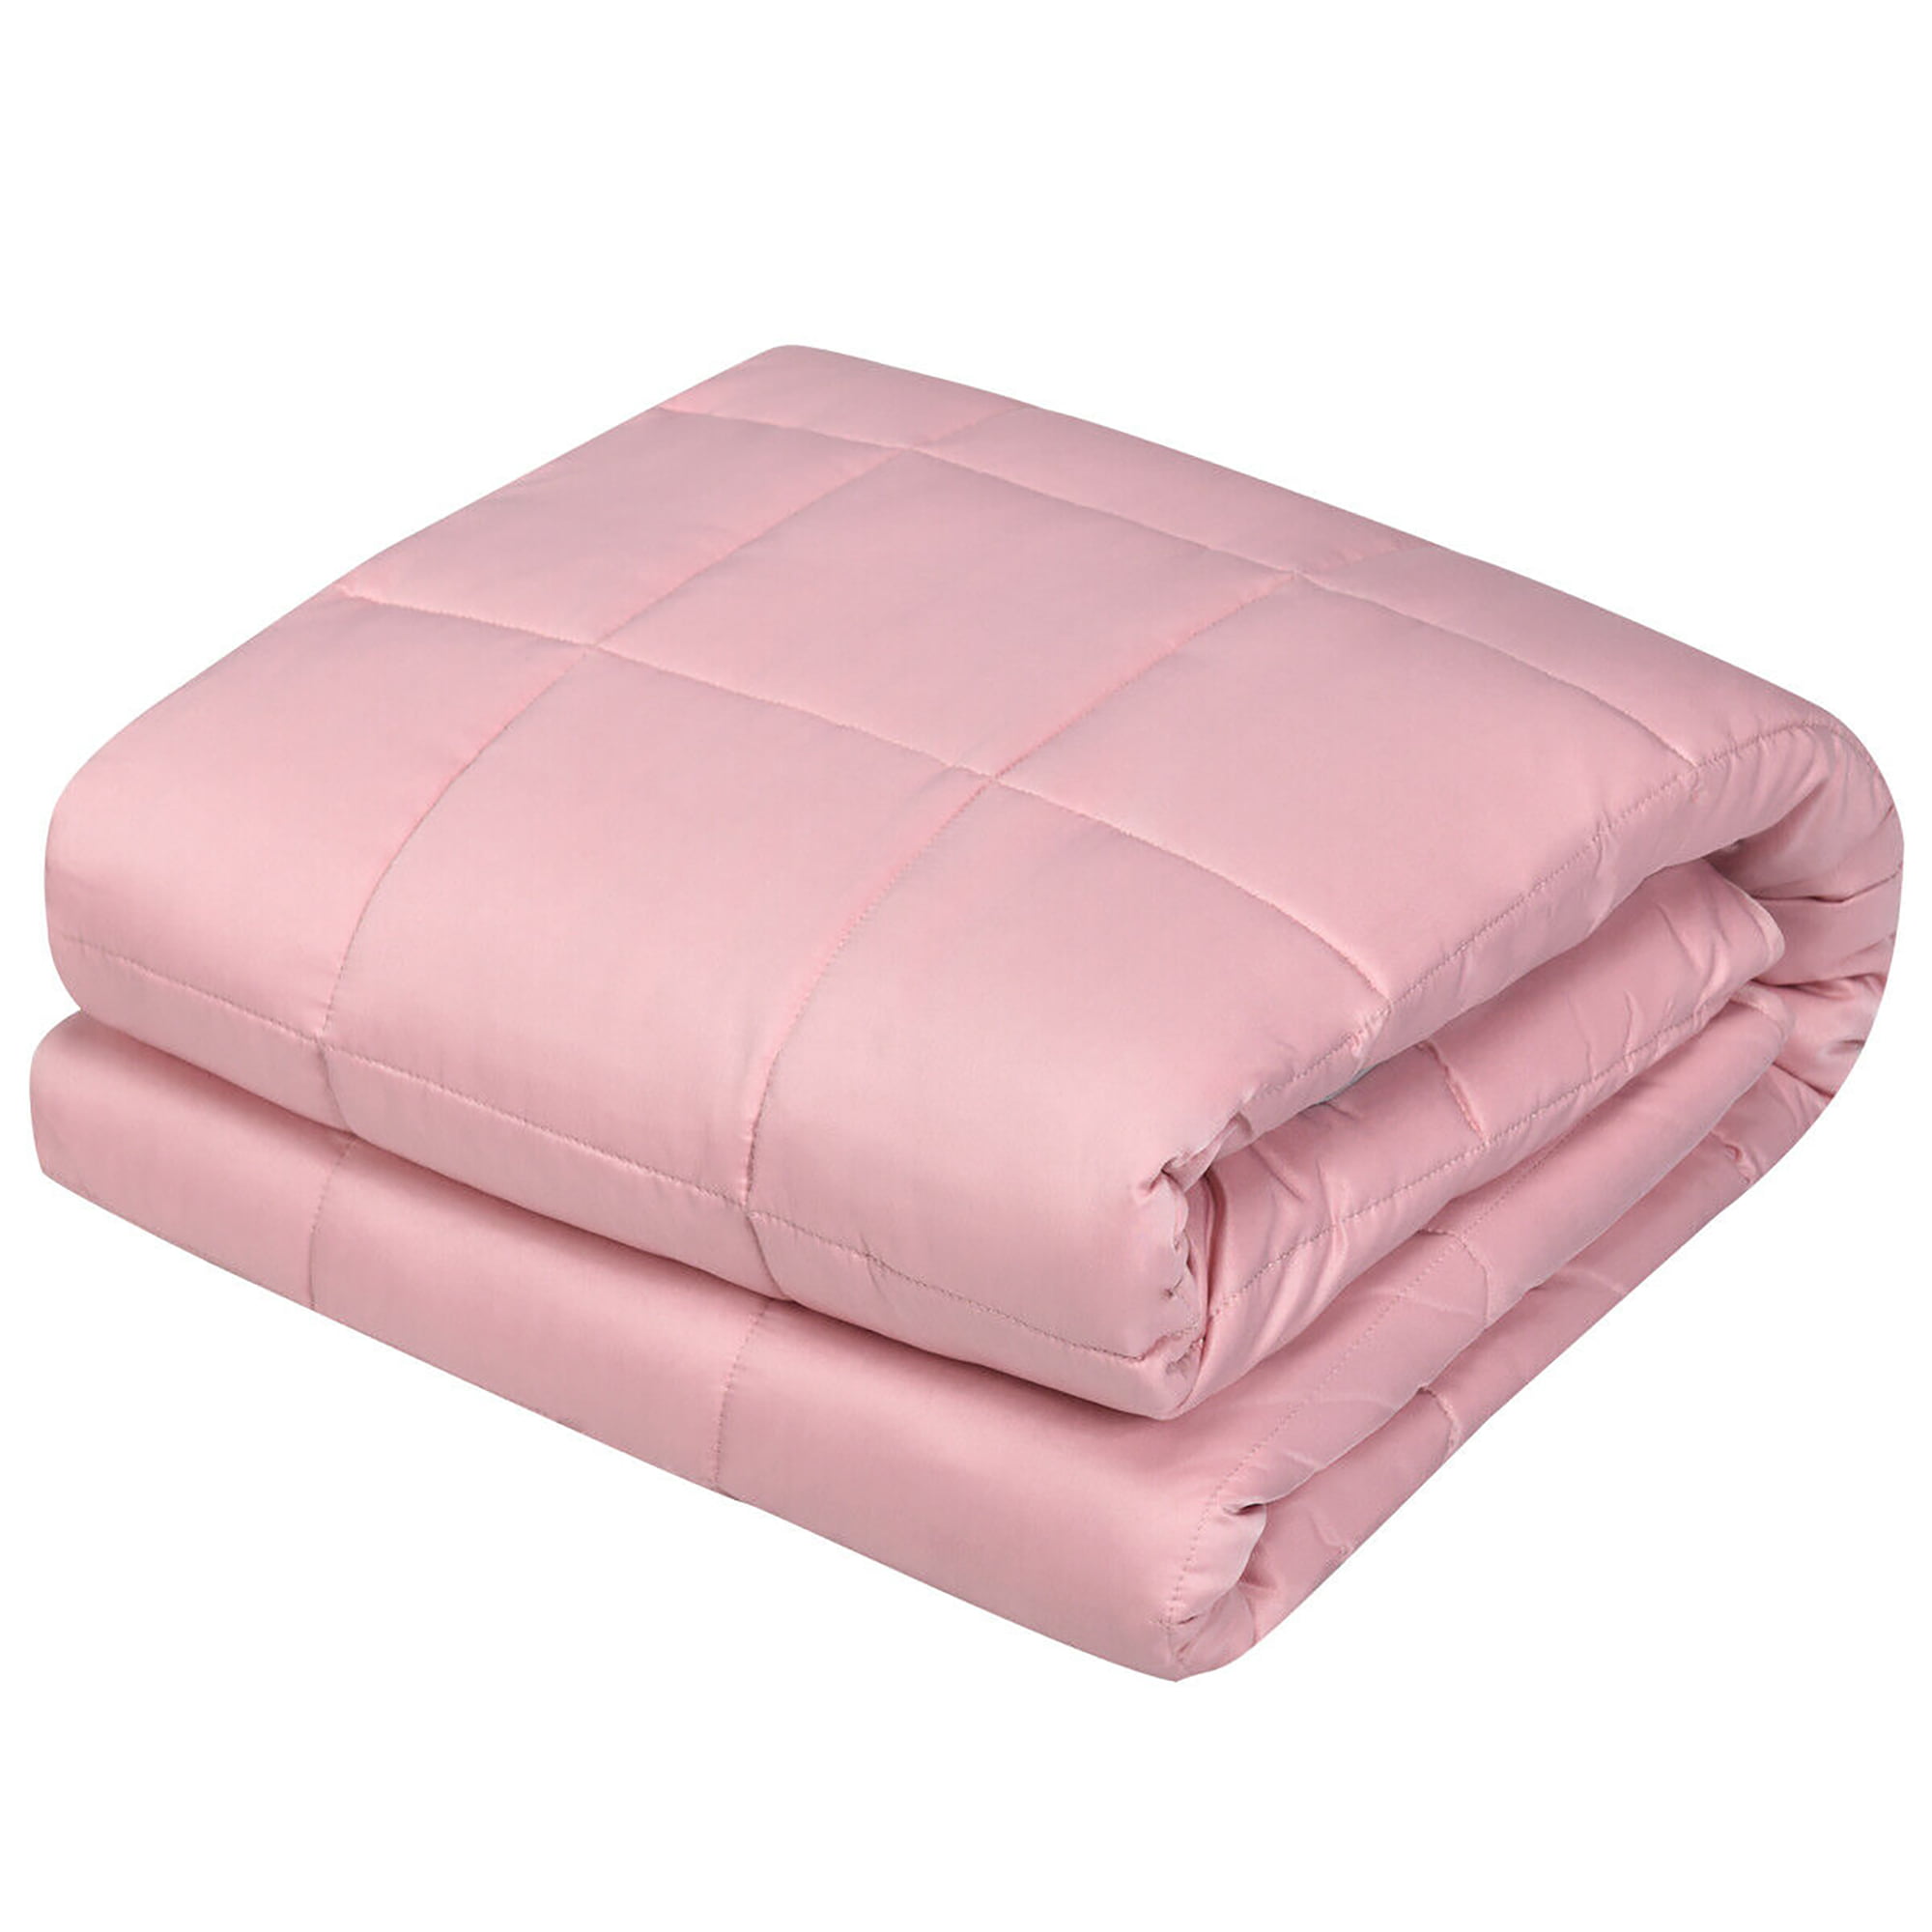 Costway 15lbs Premium Cooling Heavy Weighted Blanket Soft Fabric